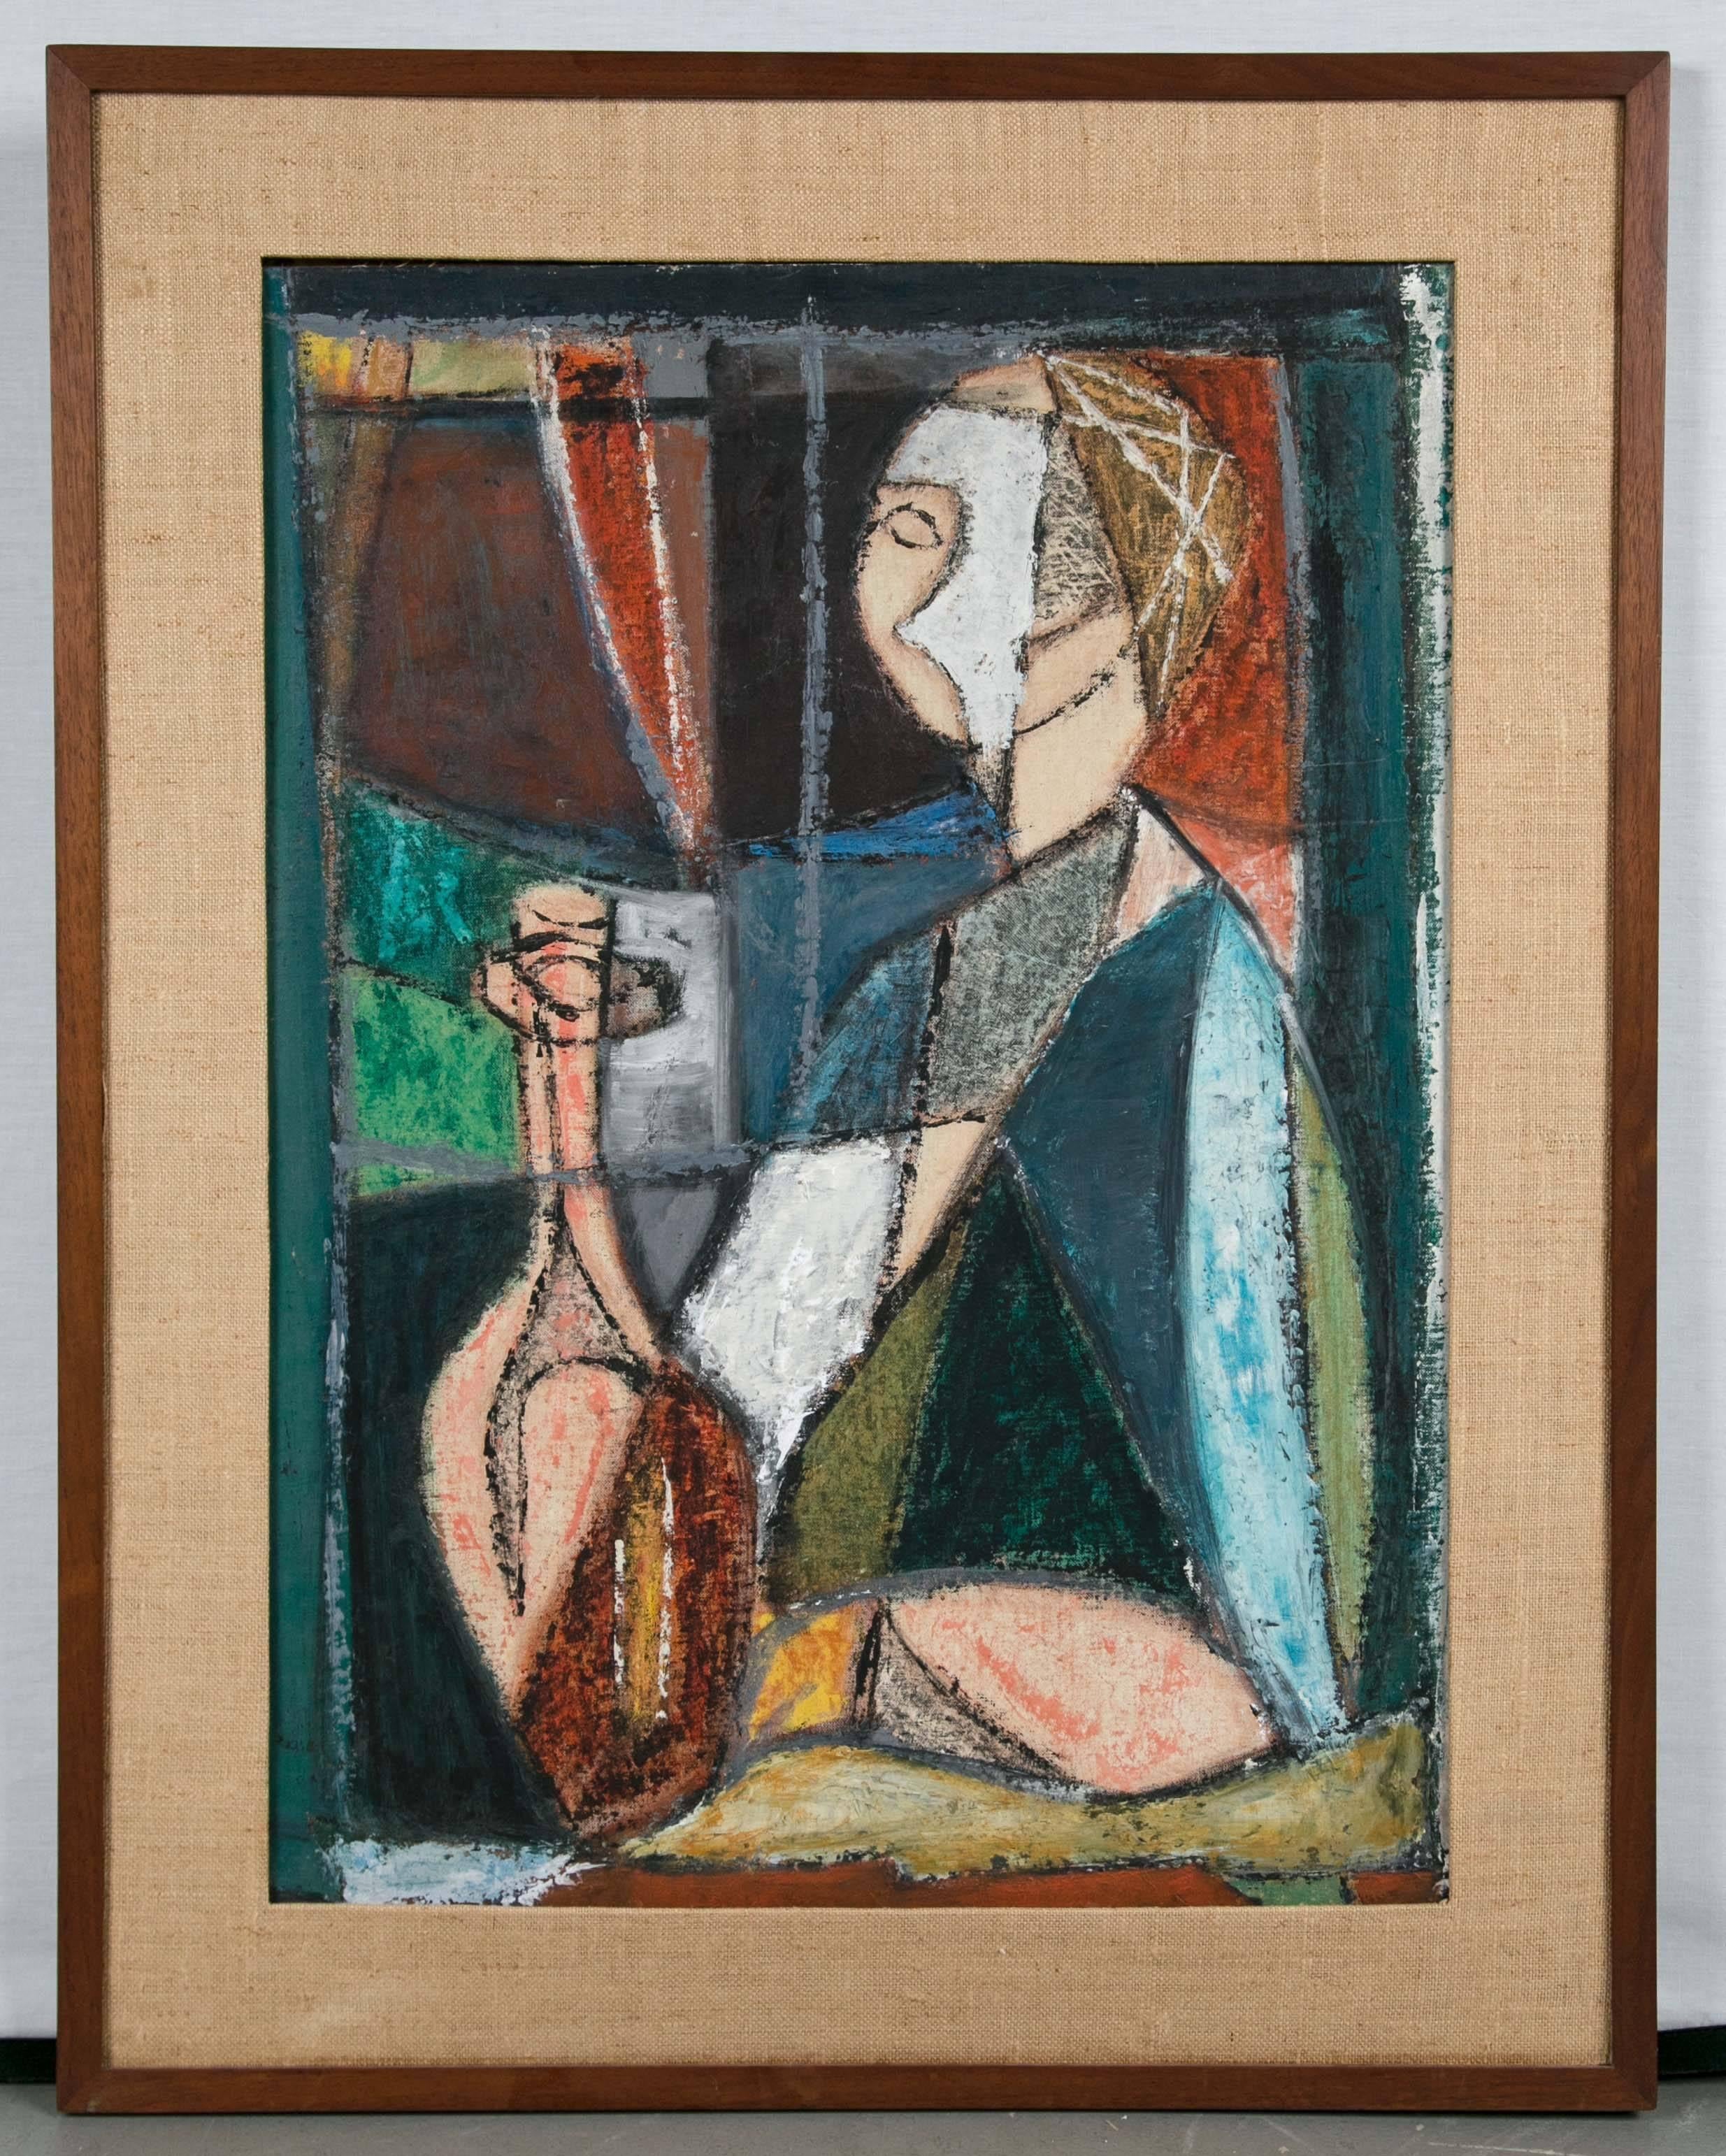 A rare 1950s cubist painting oil on artist's board of a woman. Having a composition much like the all-time cubist master painters of the early 20th century with natural brush strokes and correct color-fields. In the style and manner of Picasso.